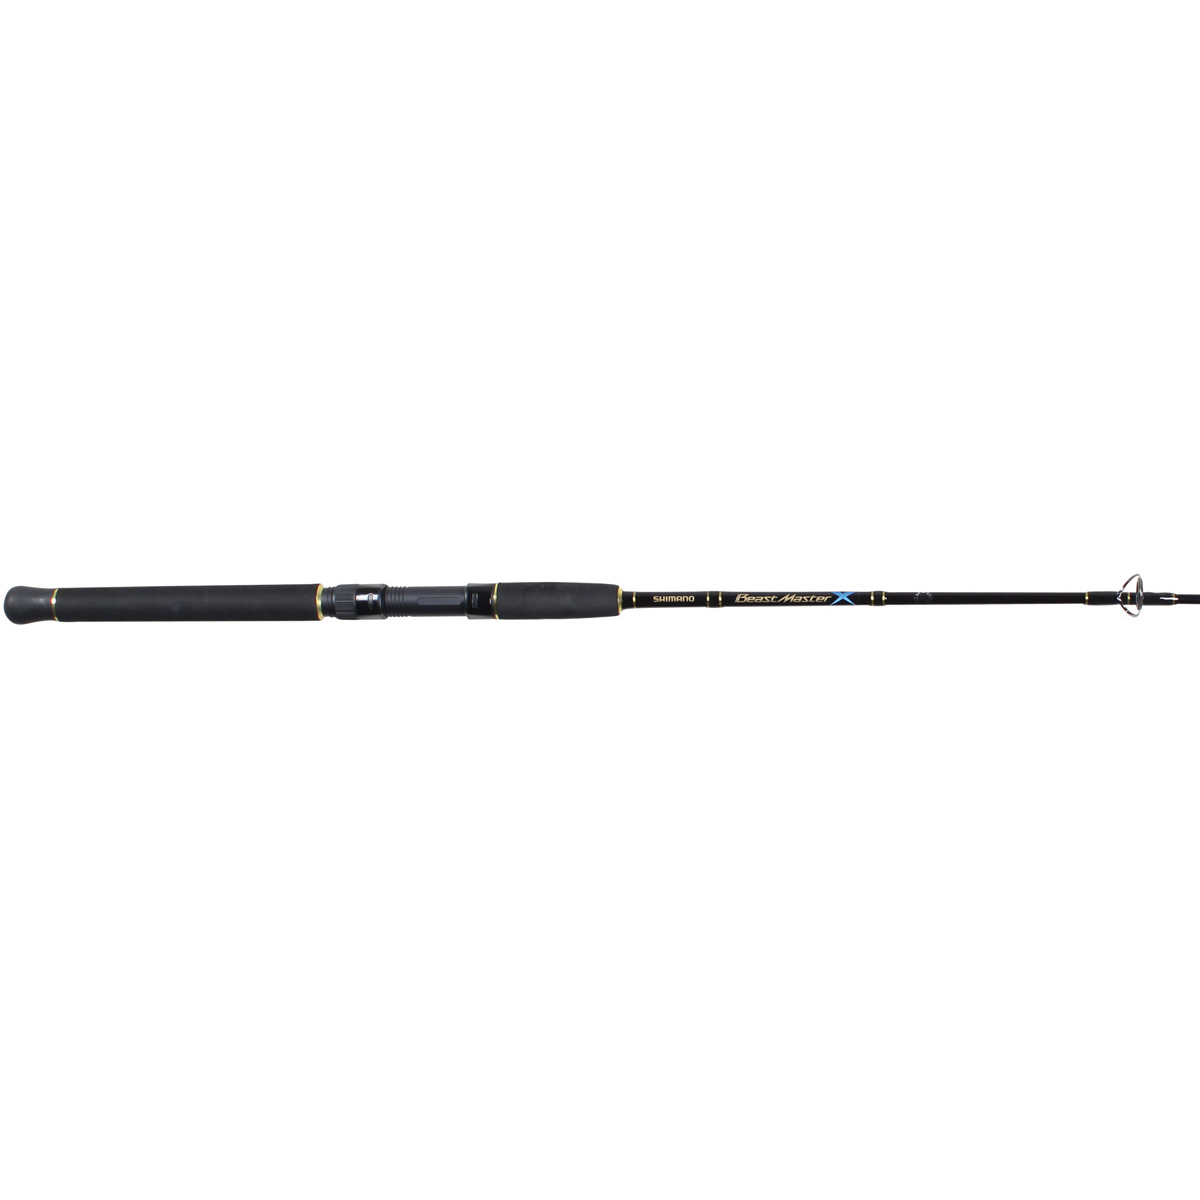 Shimano Beastmaster Spinning Rod 7ft 6in 2-4kg (3 Piece) @ Club BCF